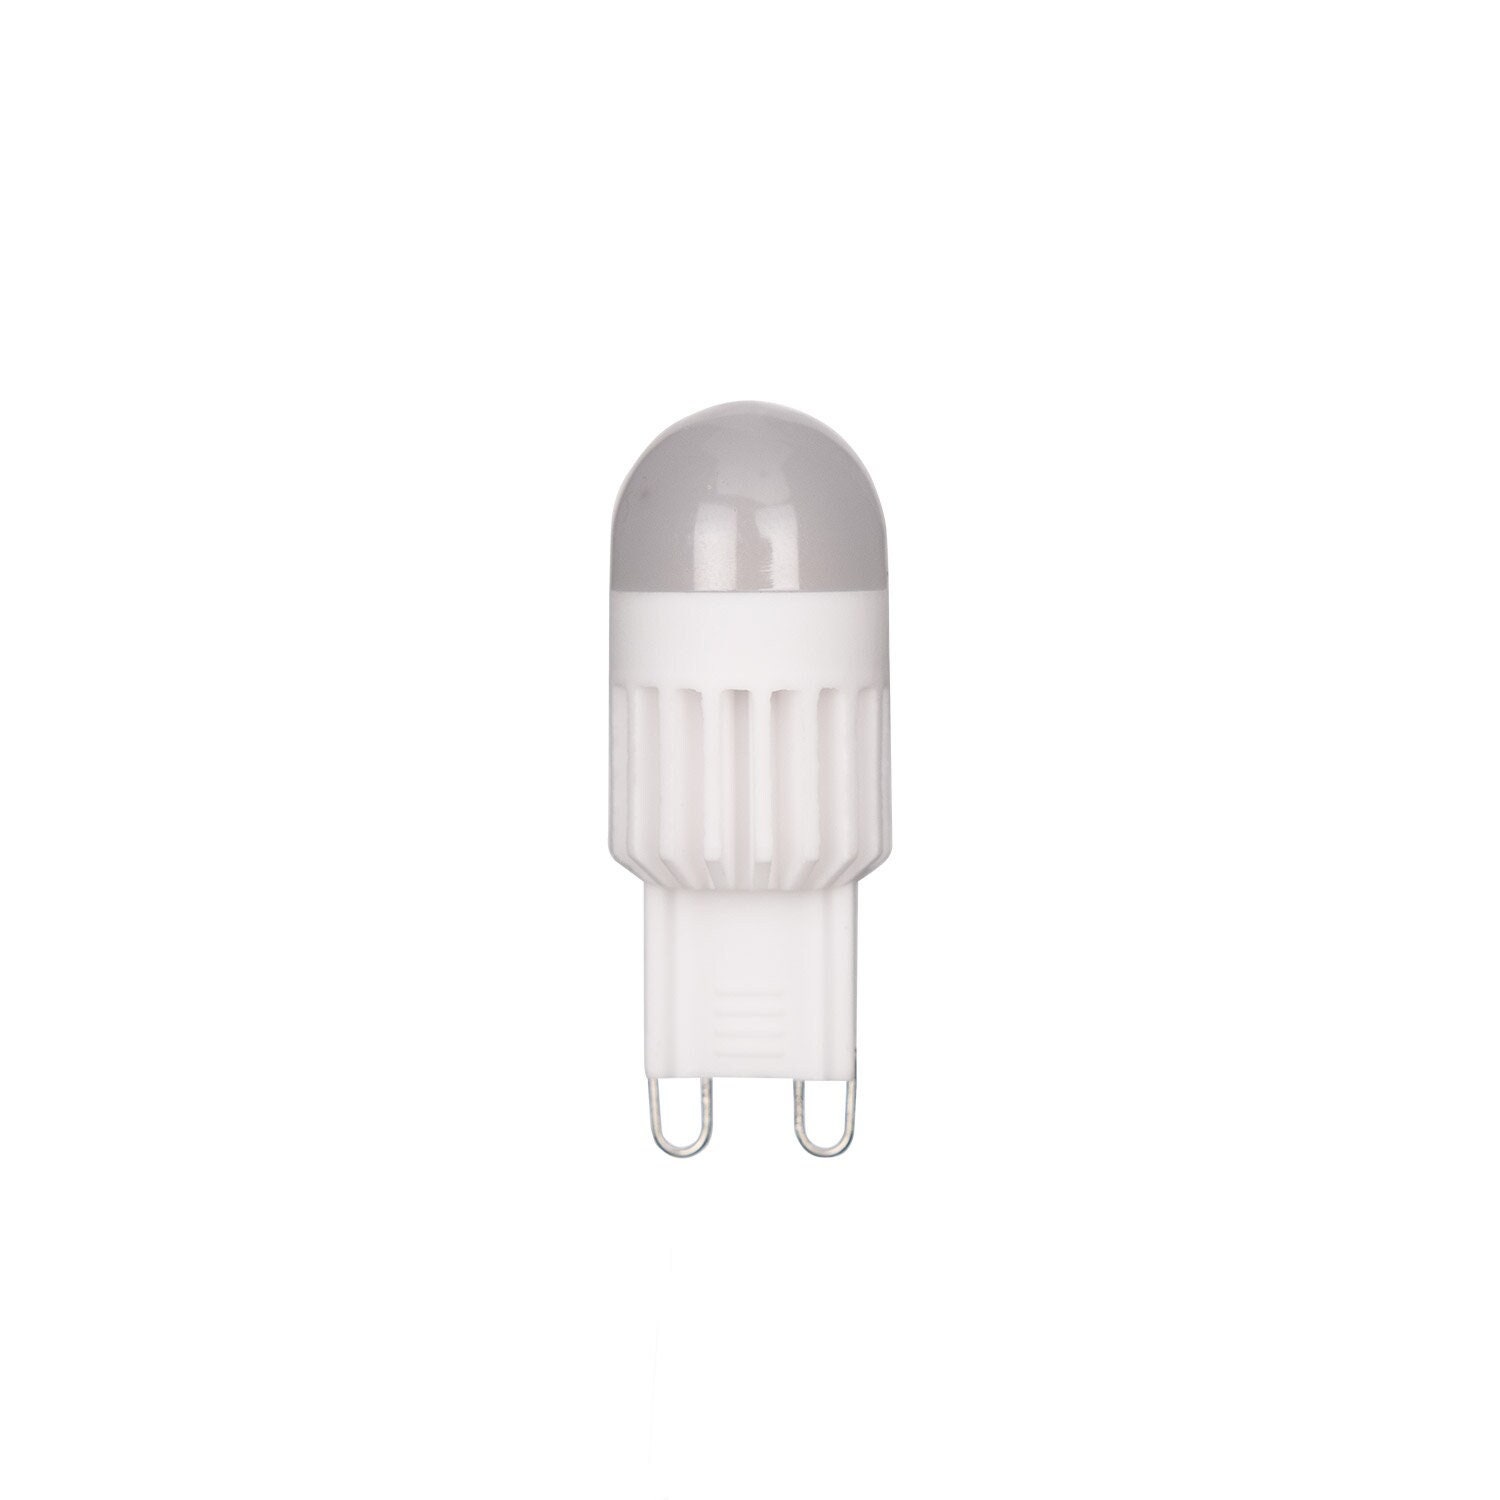 G9 LED Bulb Dimmable 3W 3000k 250lm - Etsy